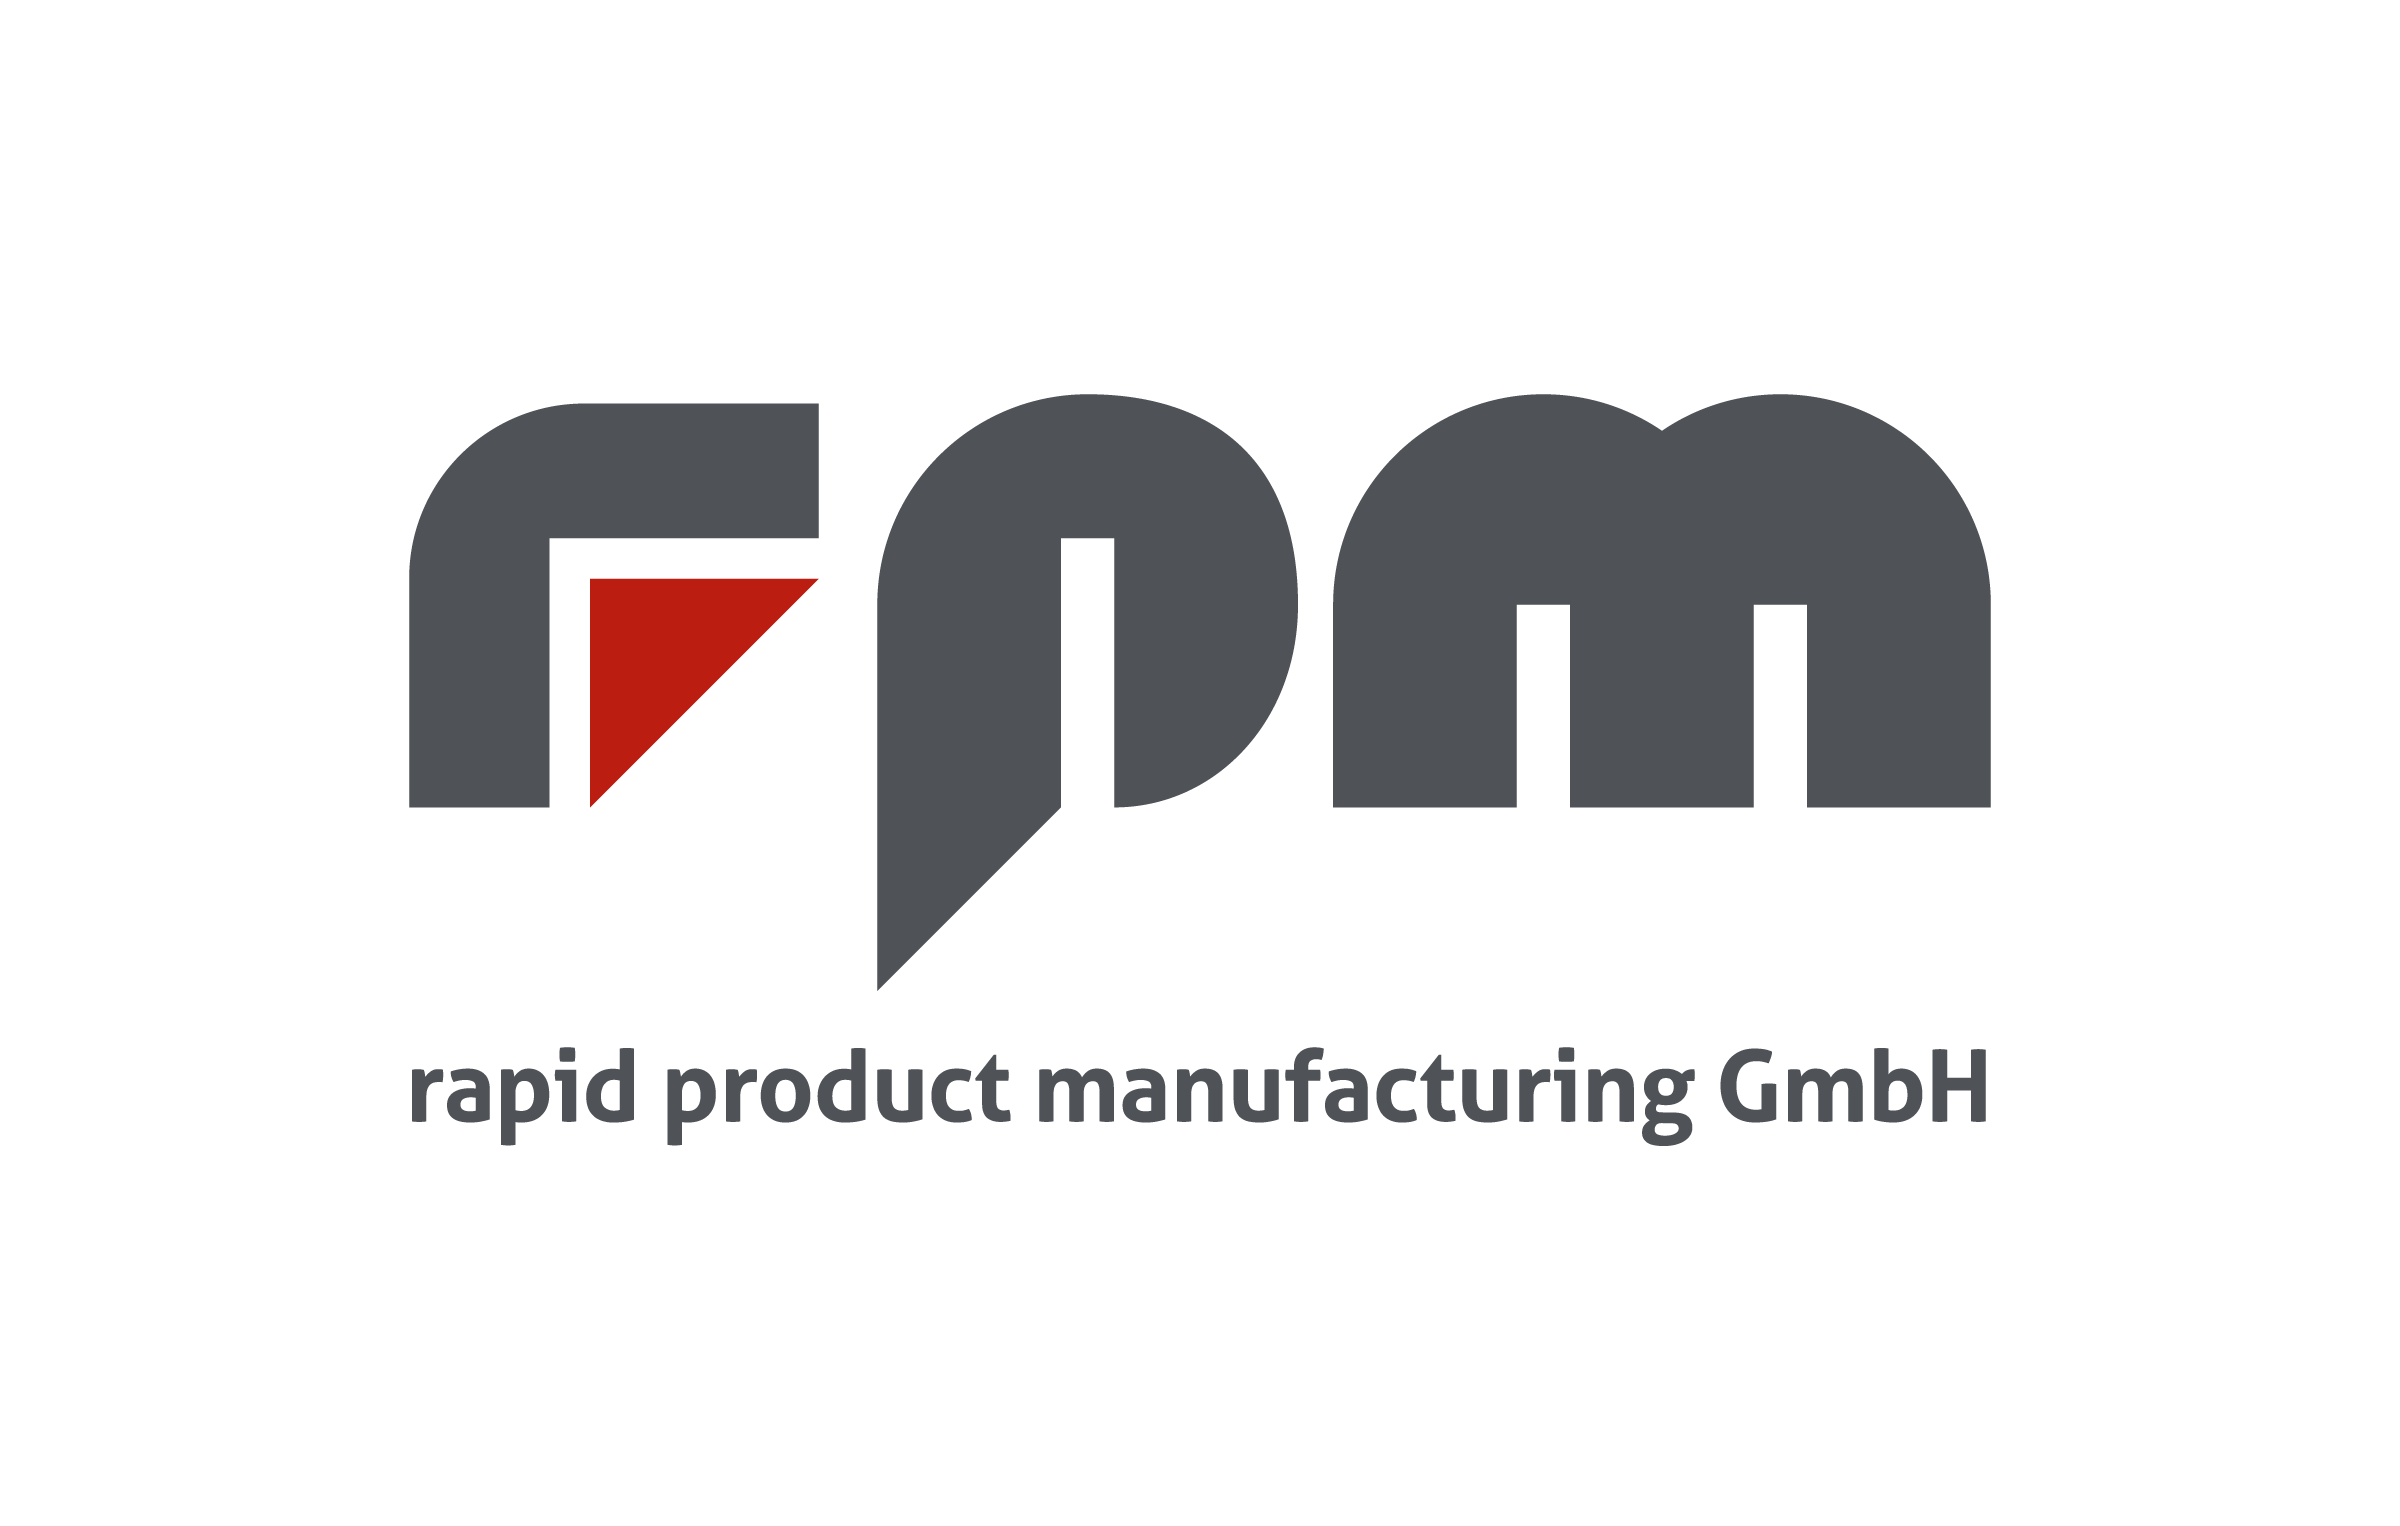 rpm rapid product manufacturing GmbH